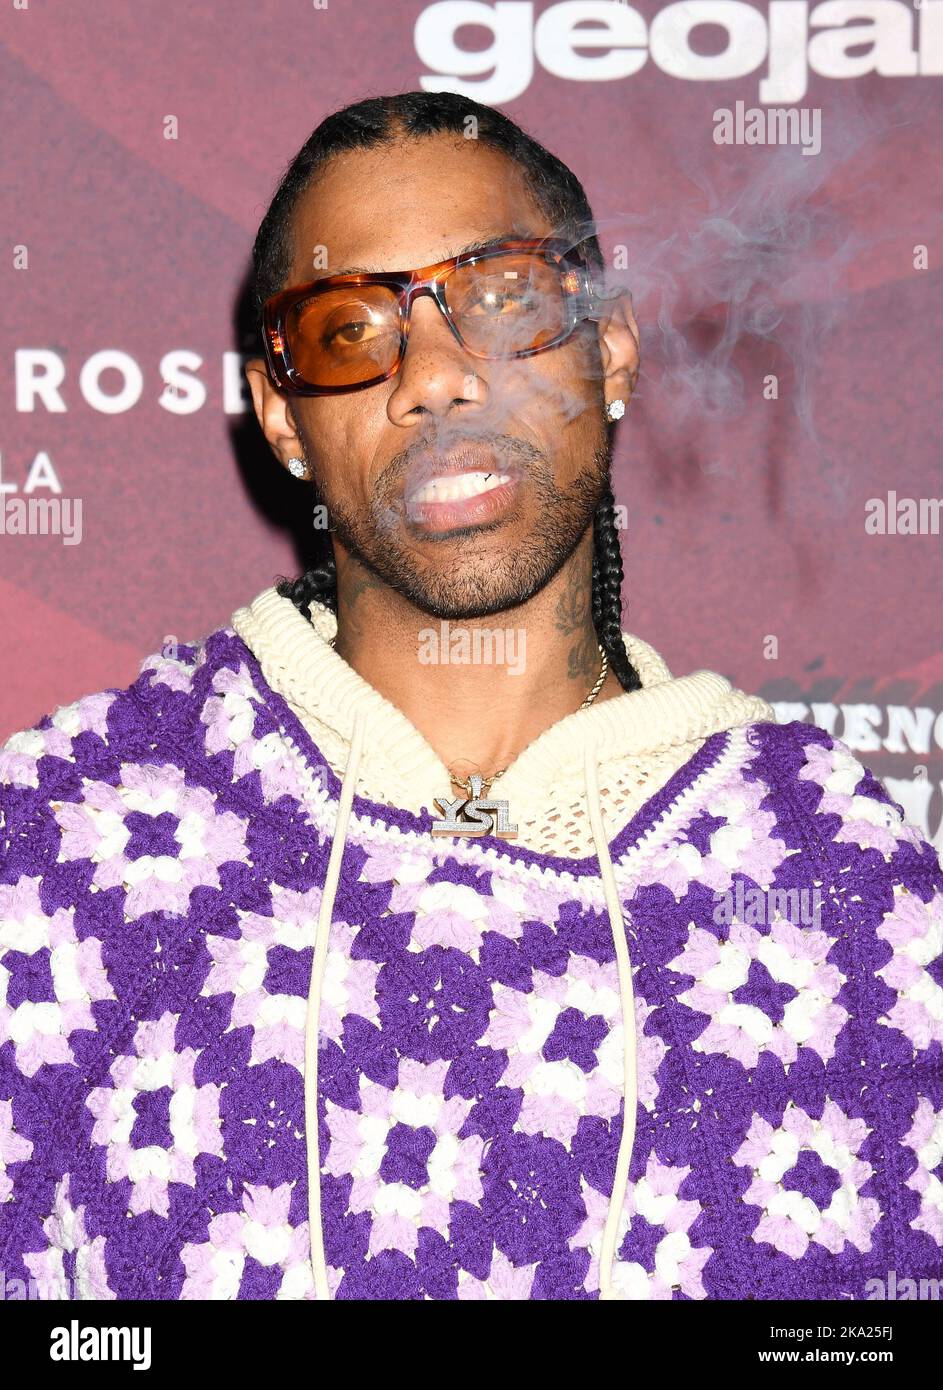 https://c8.alamy.com/comp/2KA25FJ/los-angeles-ca-29th-oct-2022-american-rapper-young-thug-jeffery-lamar-williams-attends-the-darren-dzienciols-carnevil-halloween-party-hosted-by-alessandra-ambrosio-at-a-private-residence-on-october-29-2022-in-bel-air-los-angeles-california-credit-jeffrey-mayerjtm-photosmedia-punchalamy-live-news-2KA25FJ.jpg